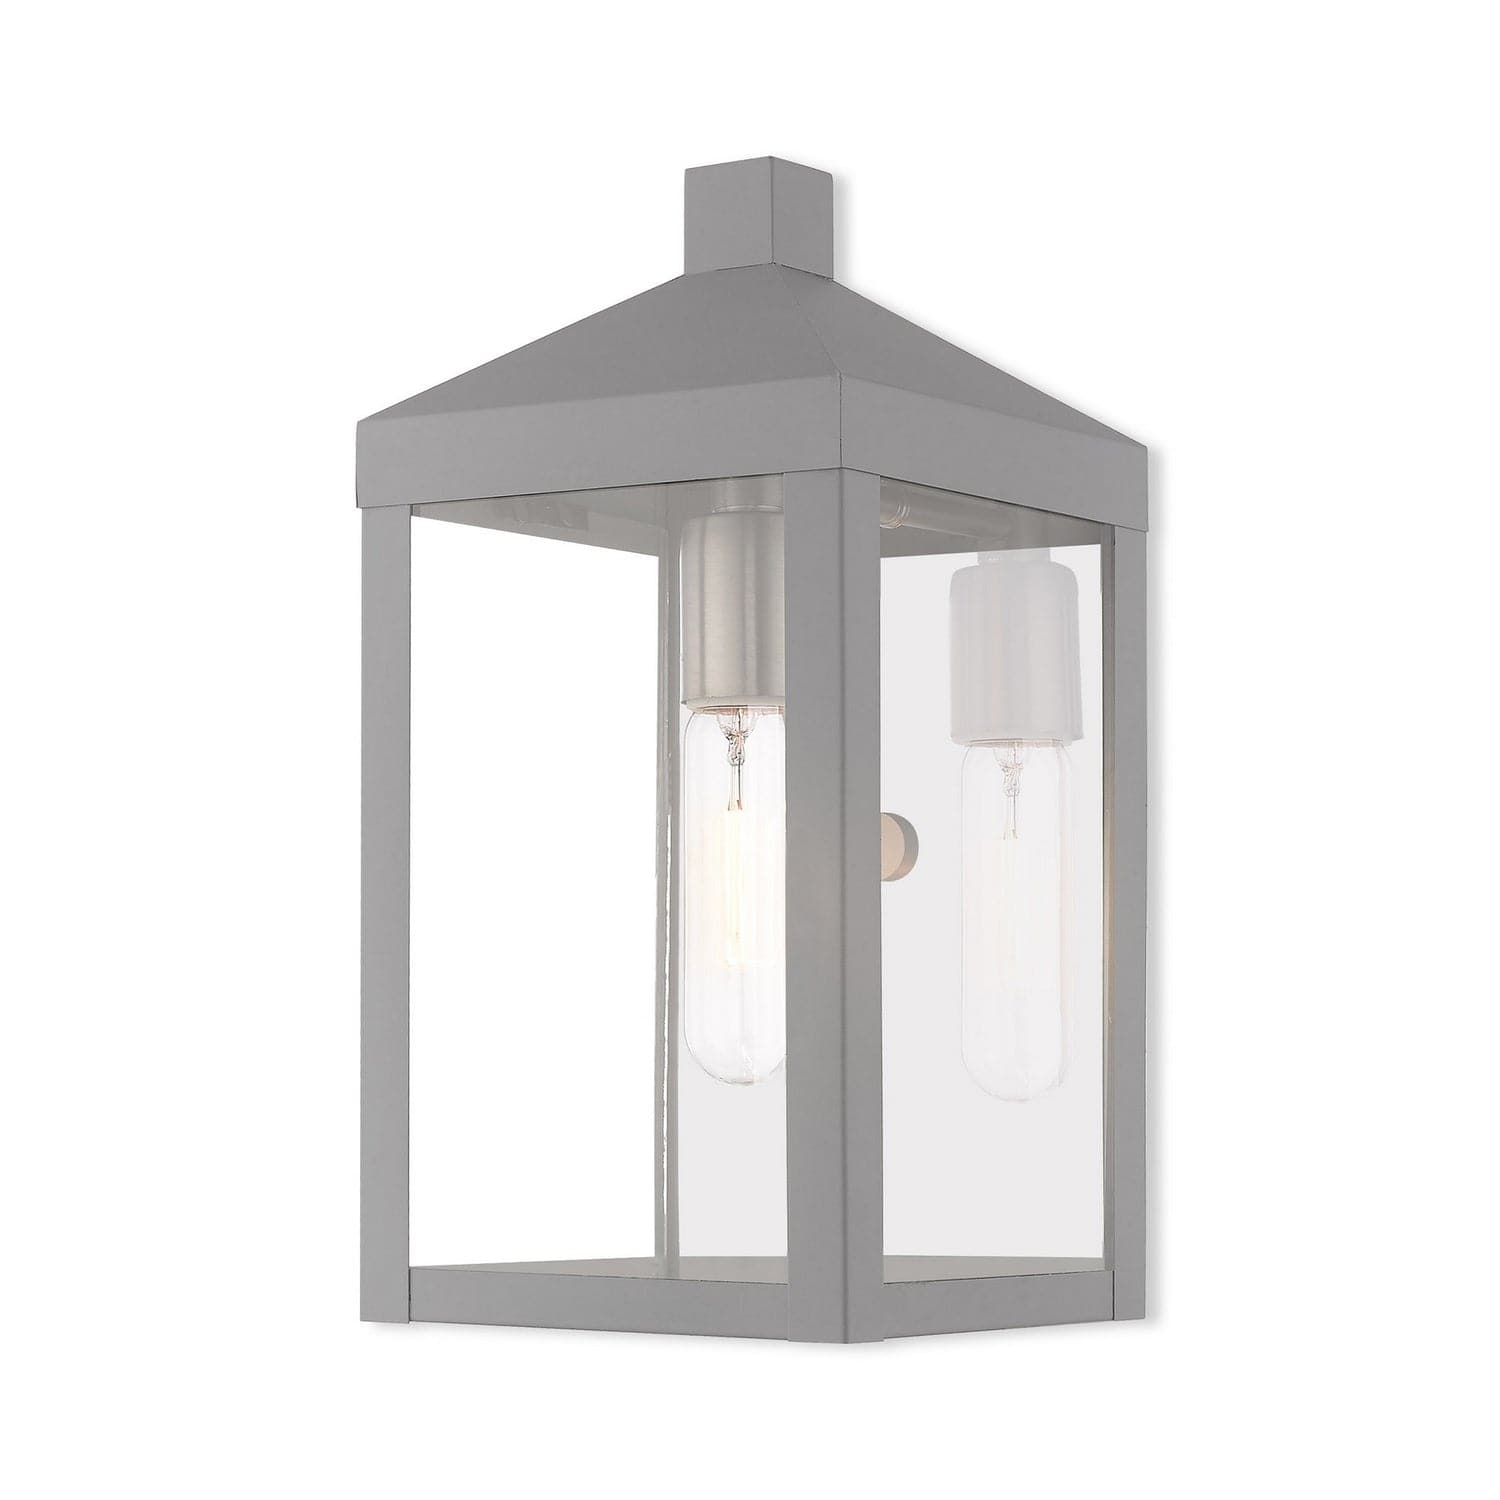 Livex Lighting - 20582-80 - One Light Outdoor Wall Lantern - Nyack - Nordic Gray w/ Brushed Nickels and Polished Chrome Stainless Steel